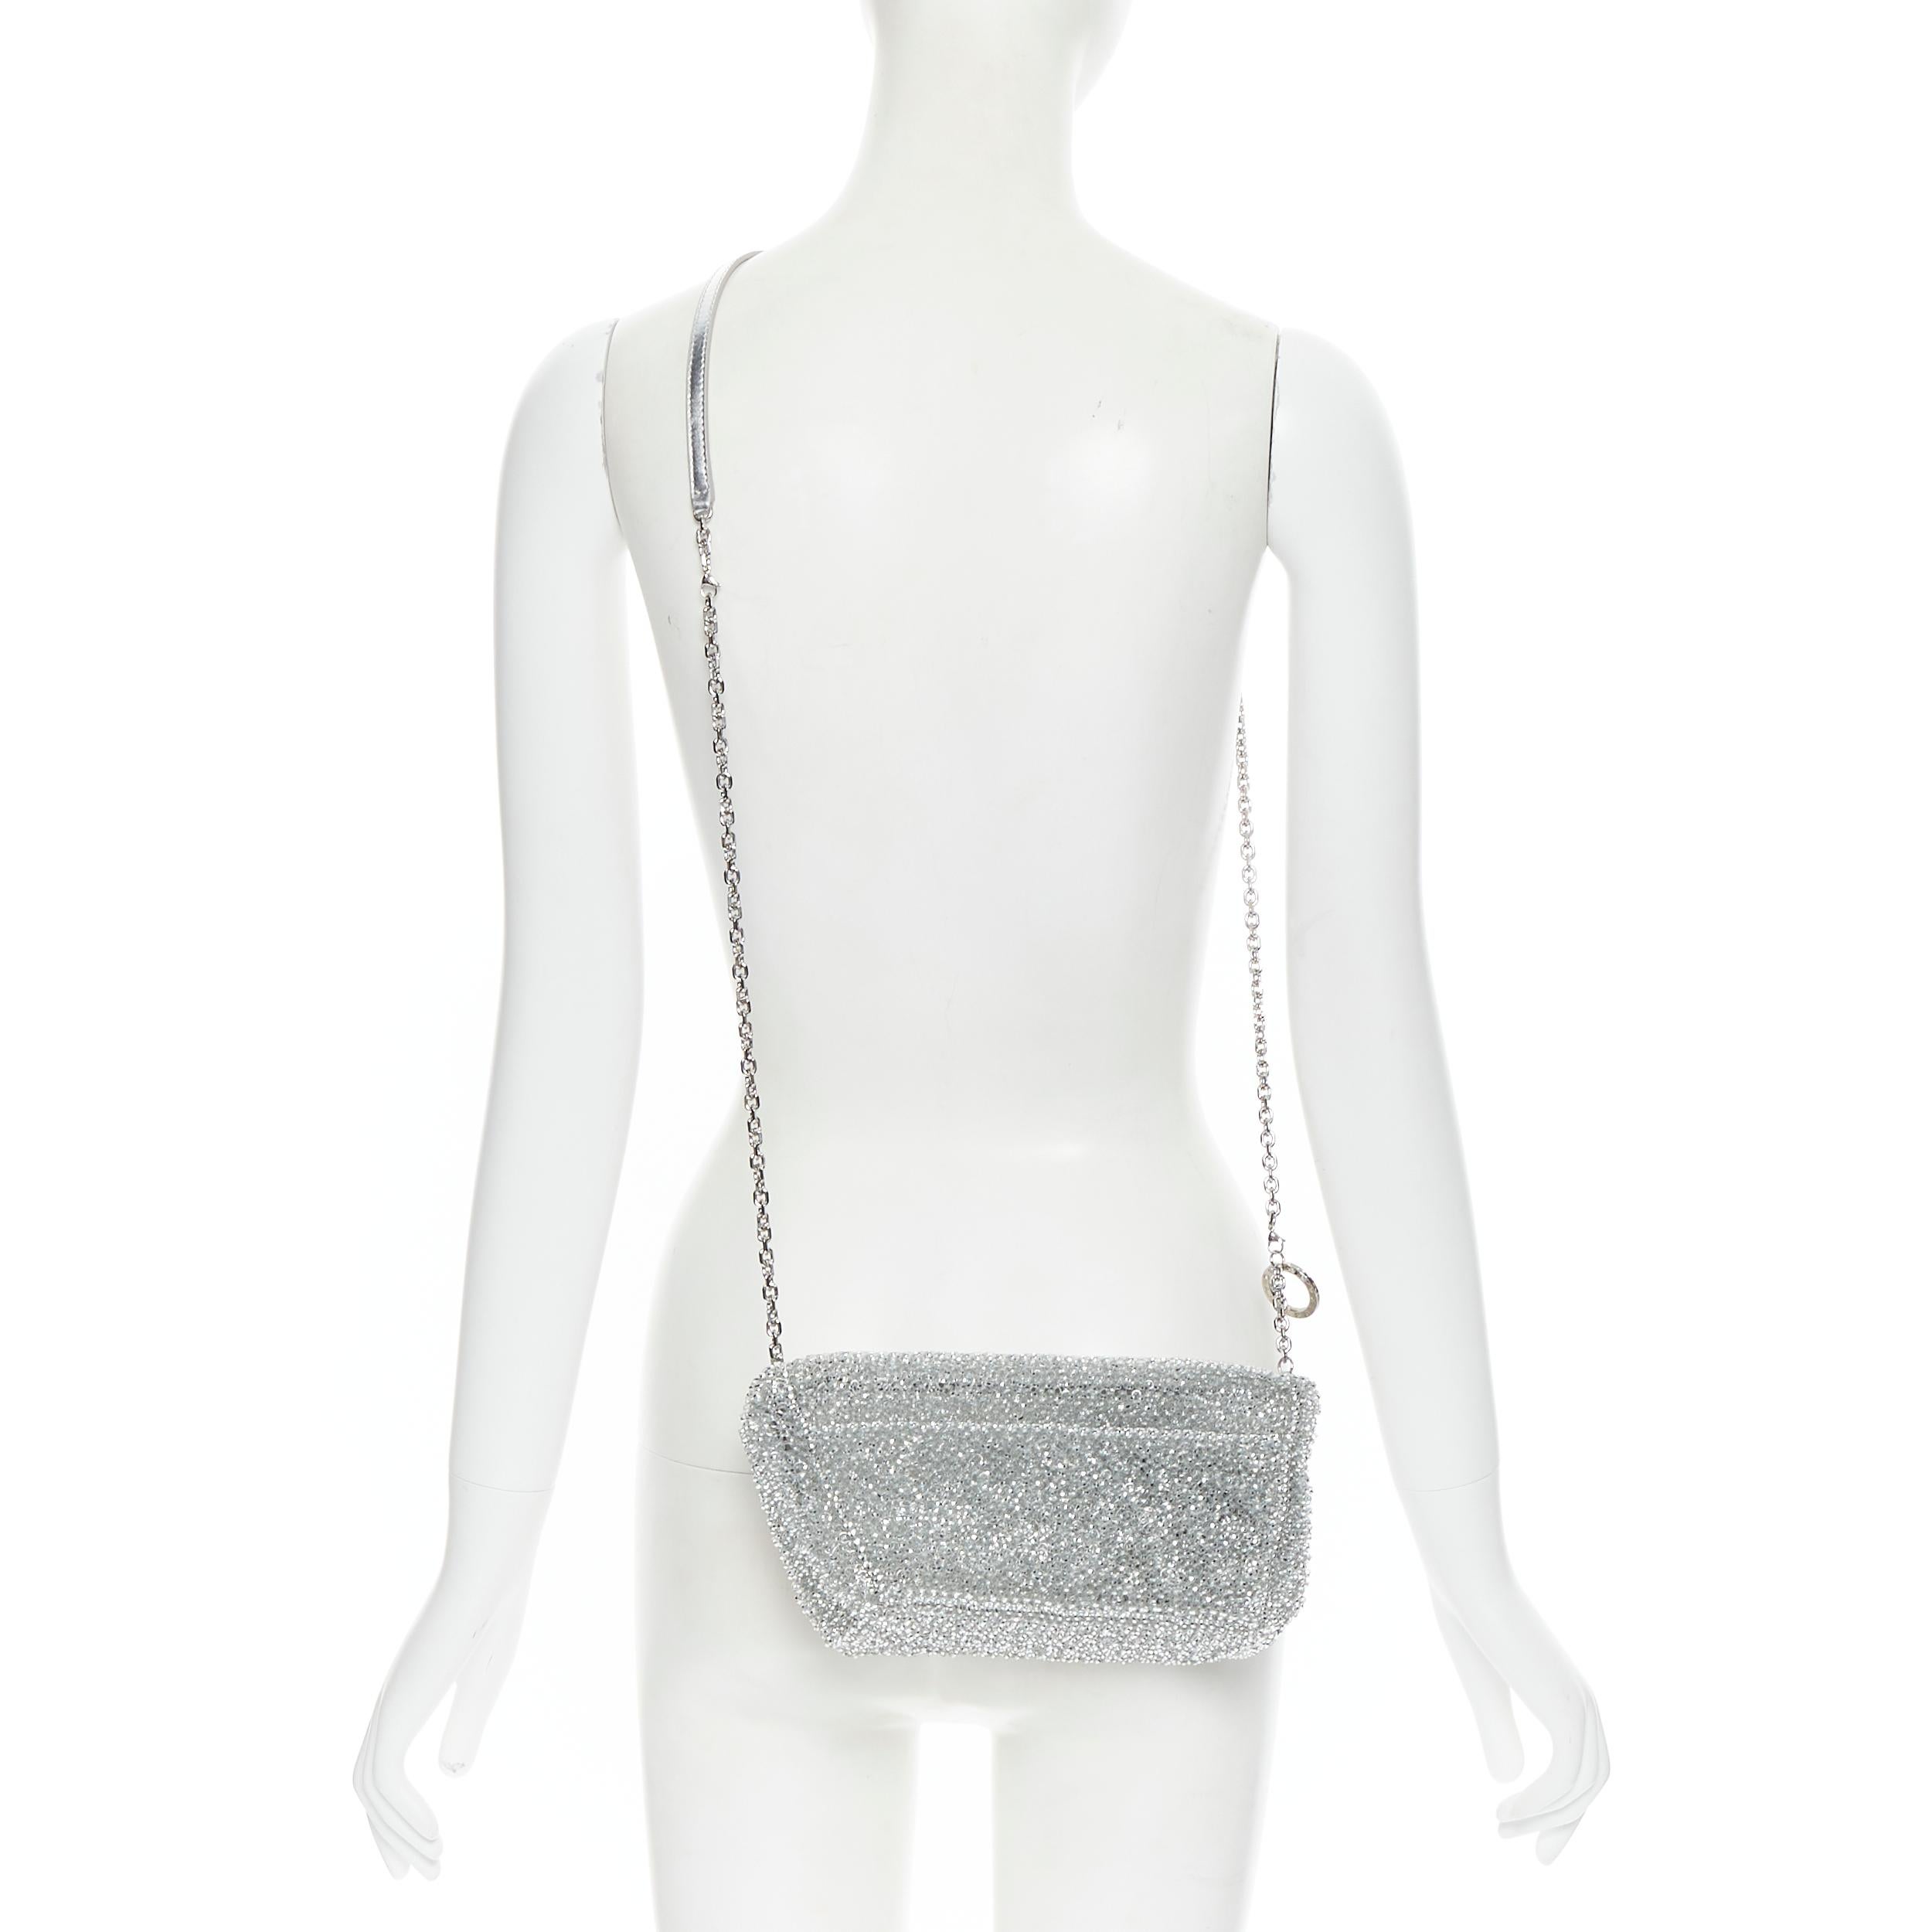 new ANTEPRIMA Rinascere silver wire woven top zip crossbody pouch bag Reference: MAWG/A00054 
Brand: Anteprima 
Model: Rinascere 
Material: Plastic 
Color: Silver 
Pattern: Solid 
Closure: Zip 

CONDITION: 
Condition: New with tags. 

MEASUREMENTS: